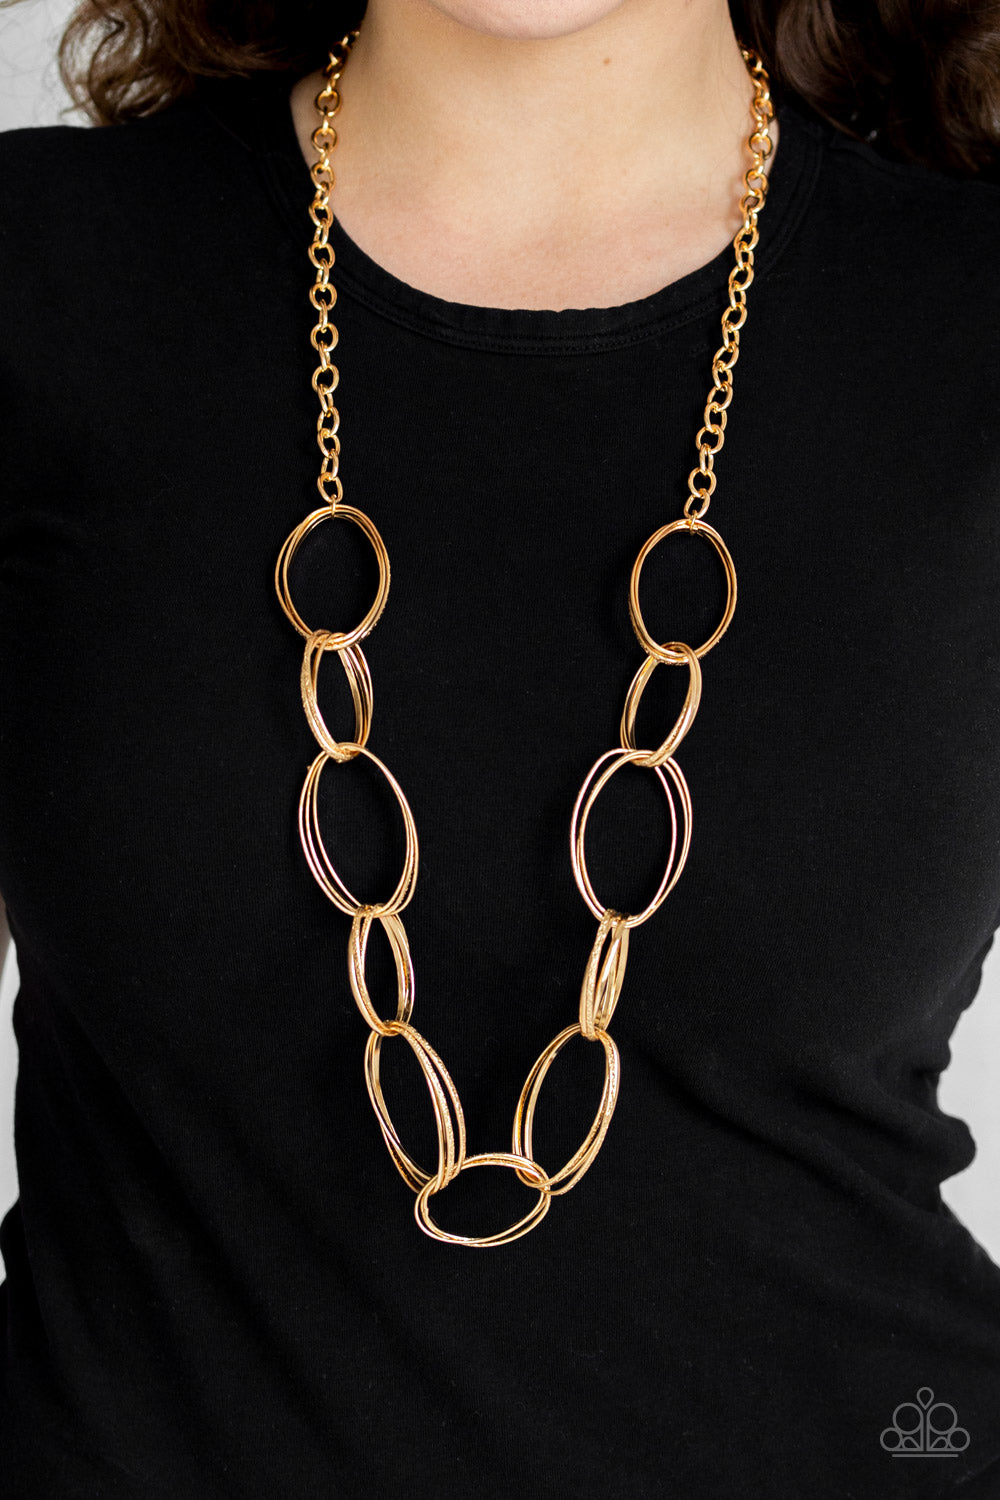 Paparazzi Accessories - Ring Bling - Gold Necklace